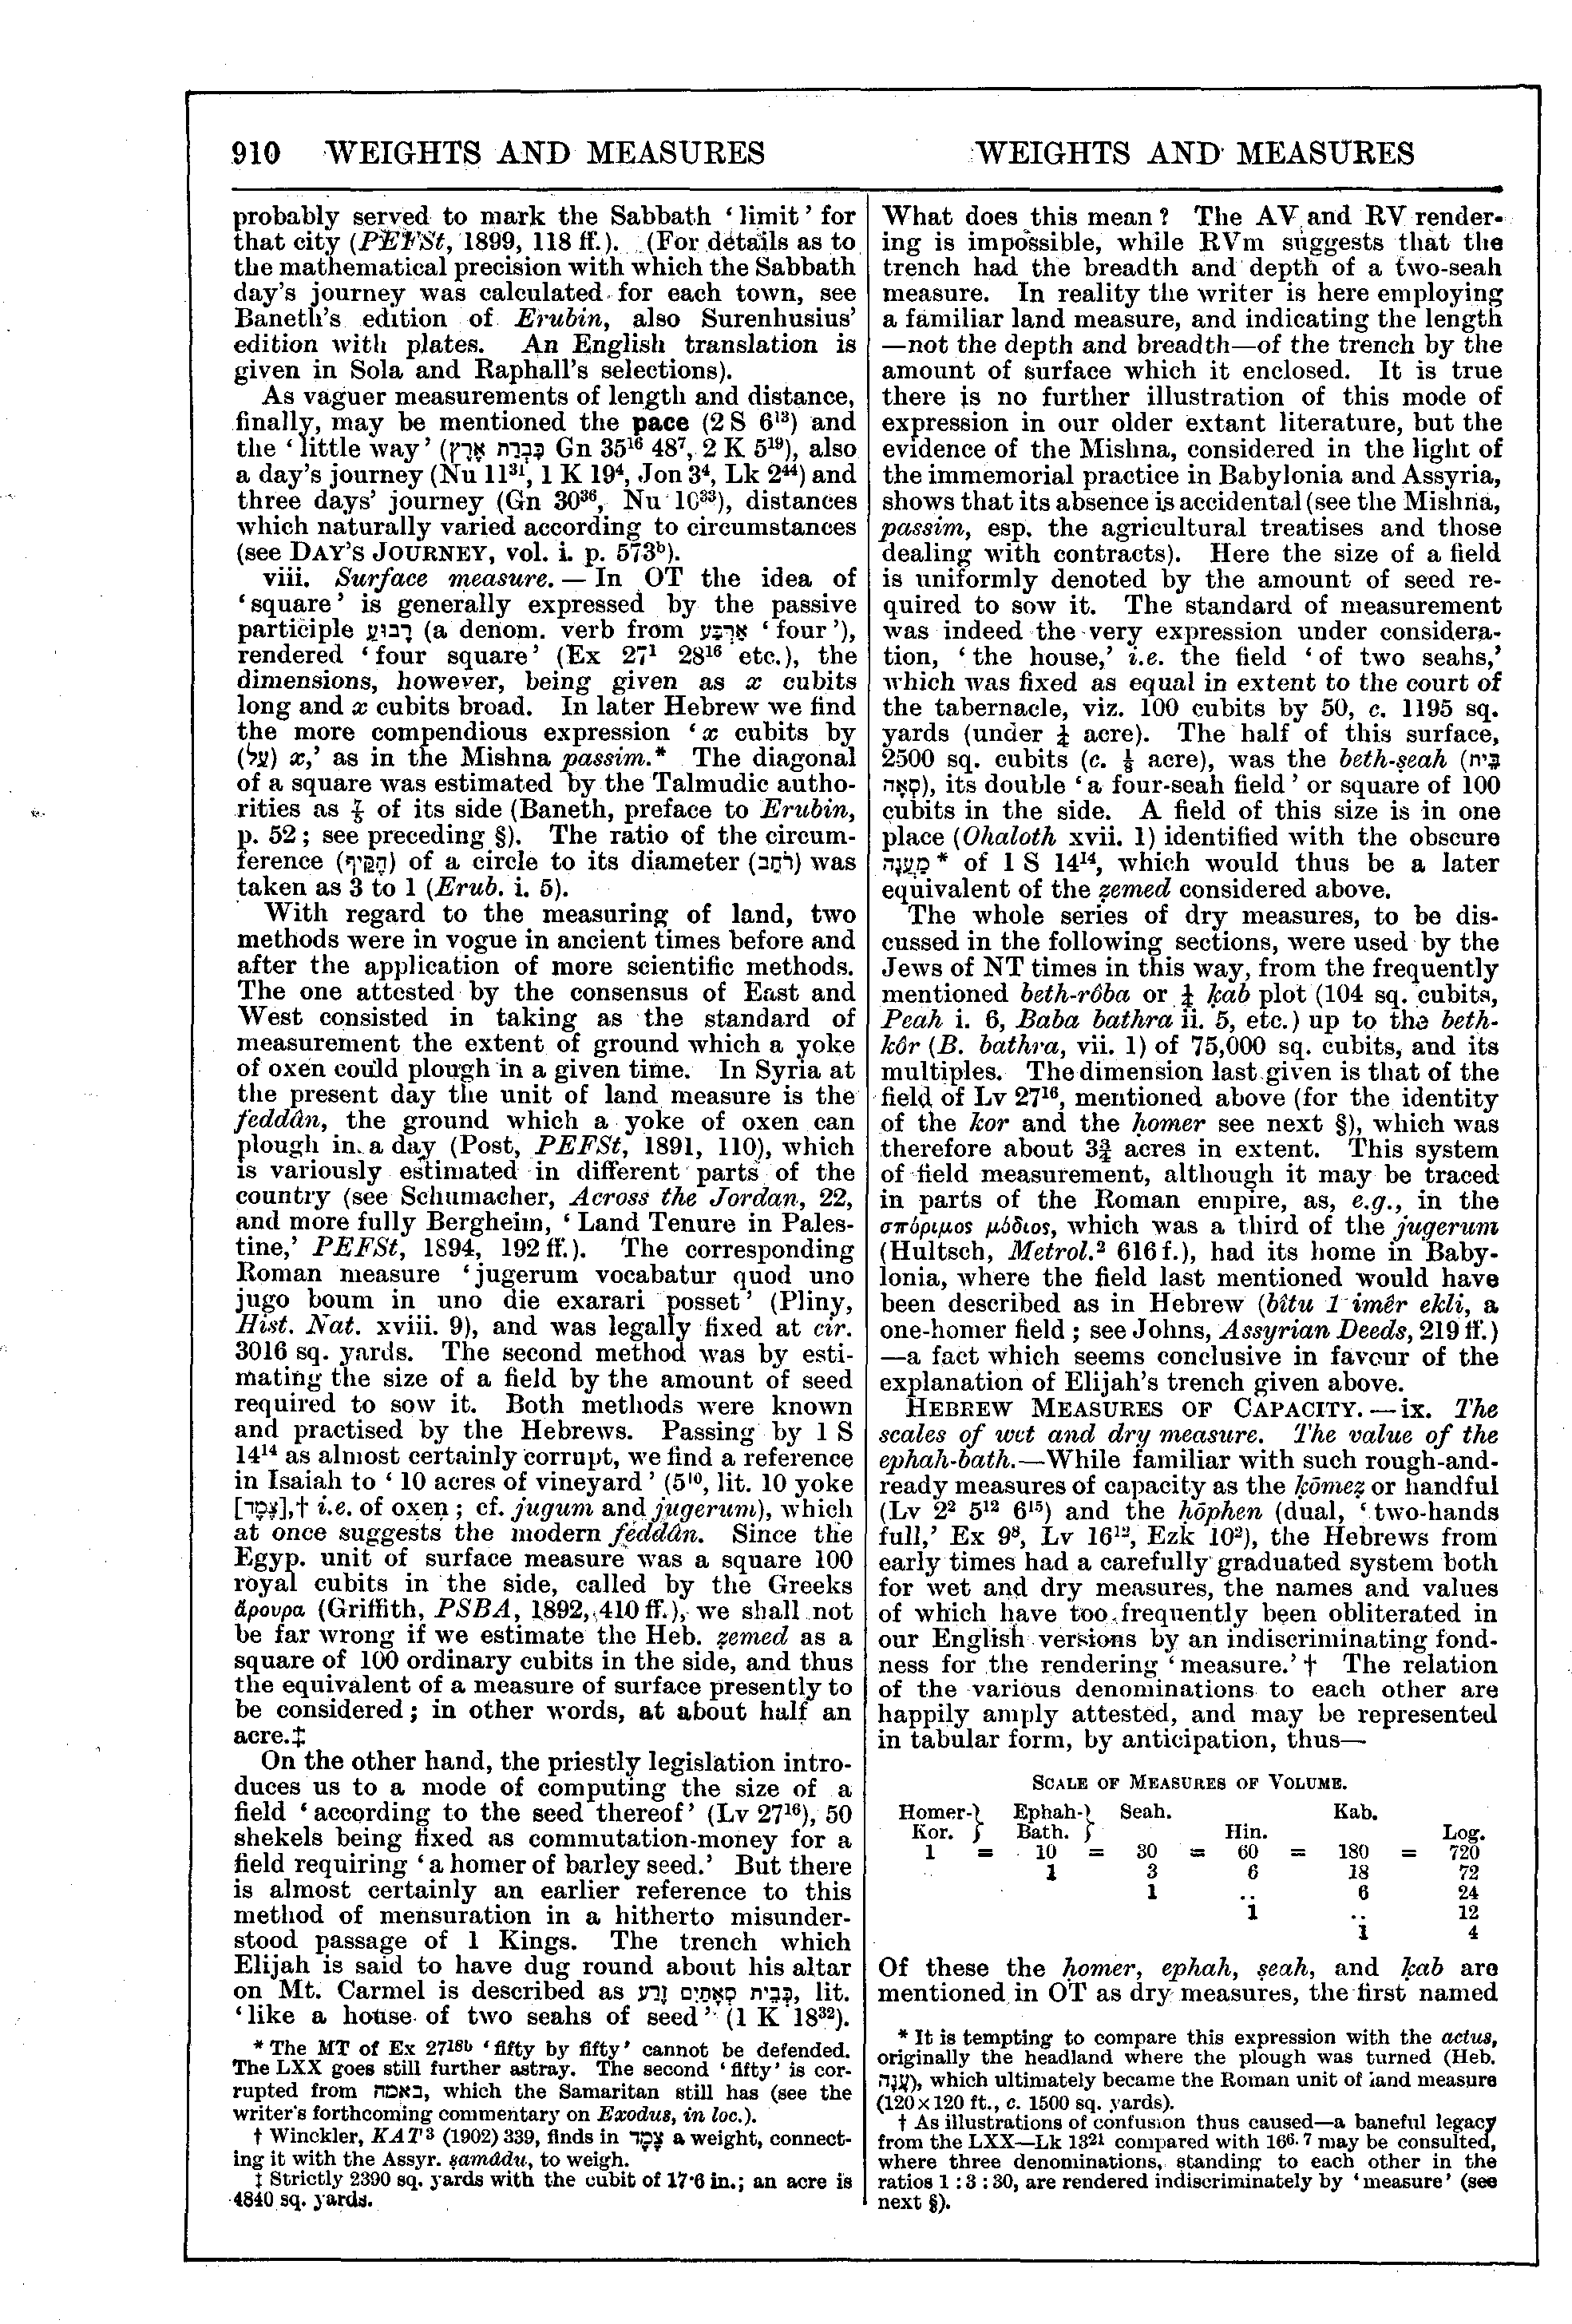 Image of page 910